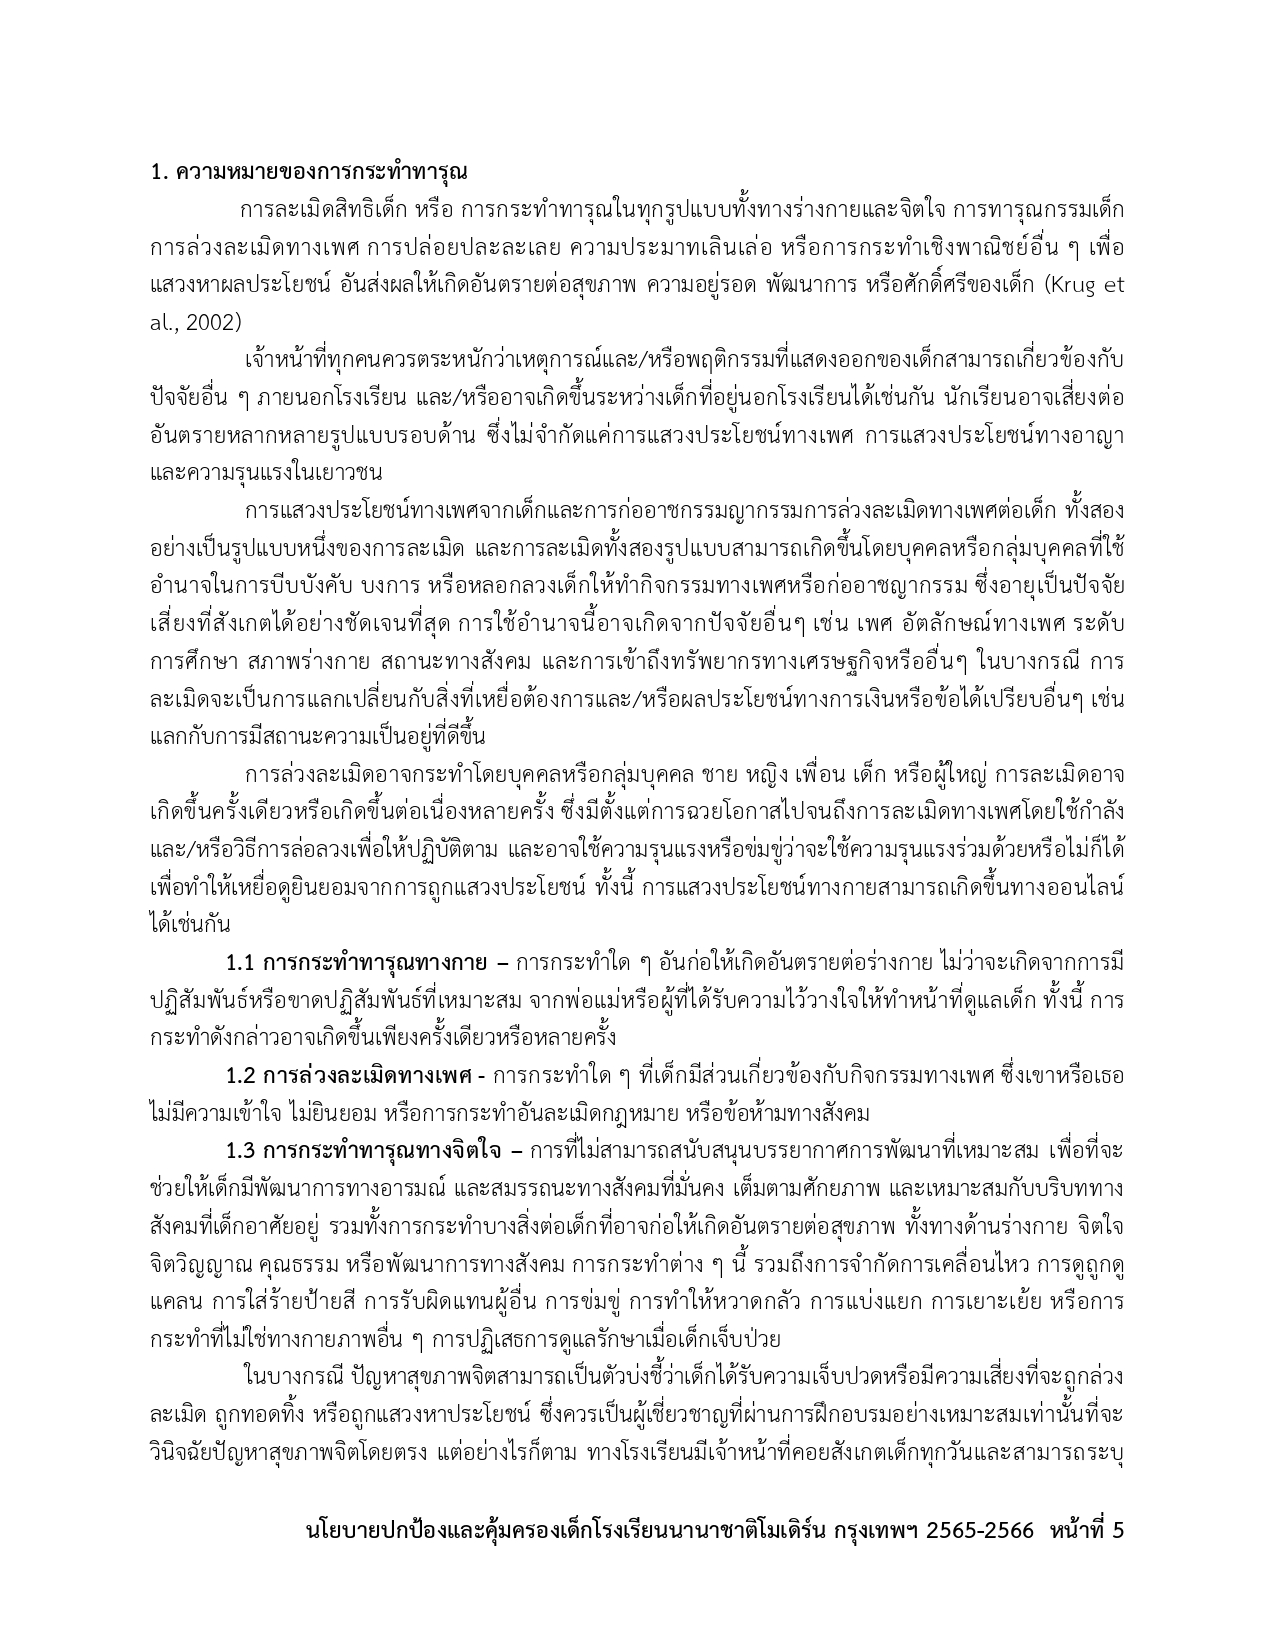 Child Protection Policy Thai Version page 0005